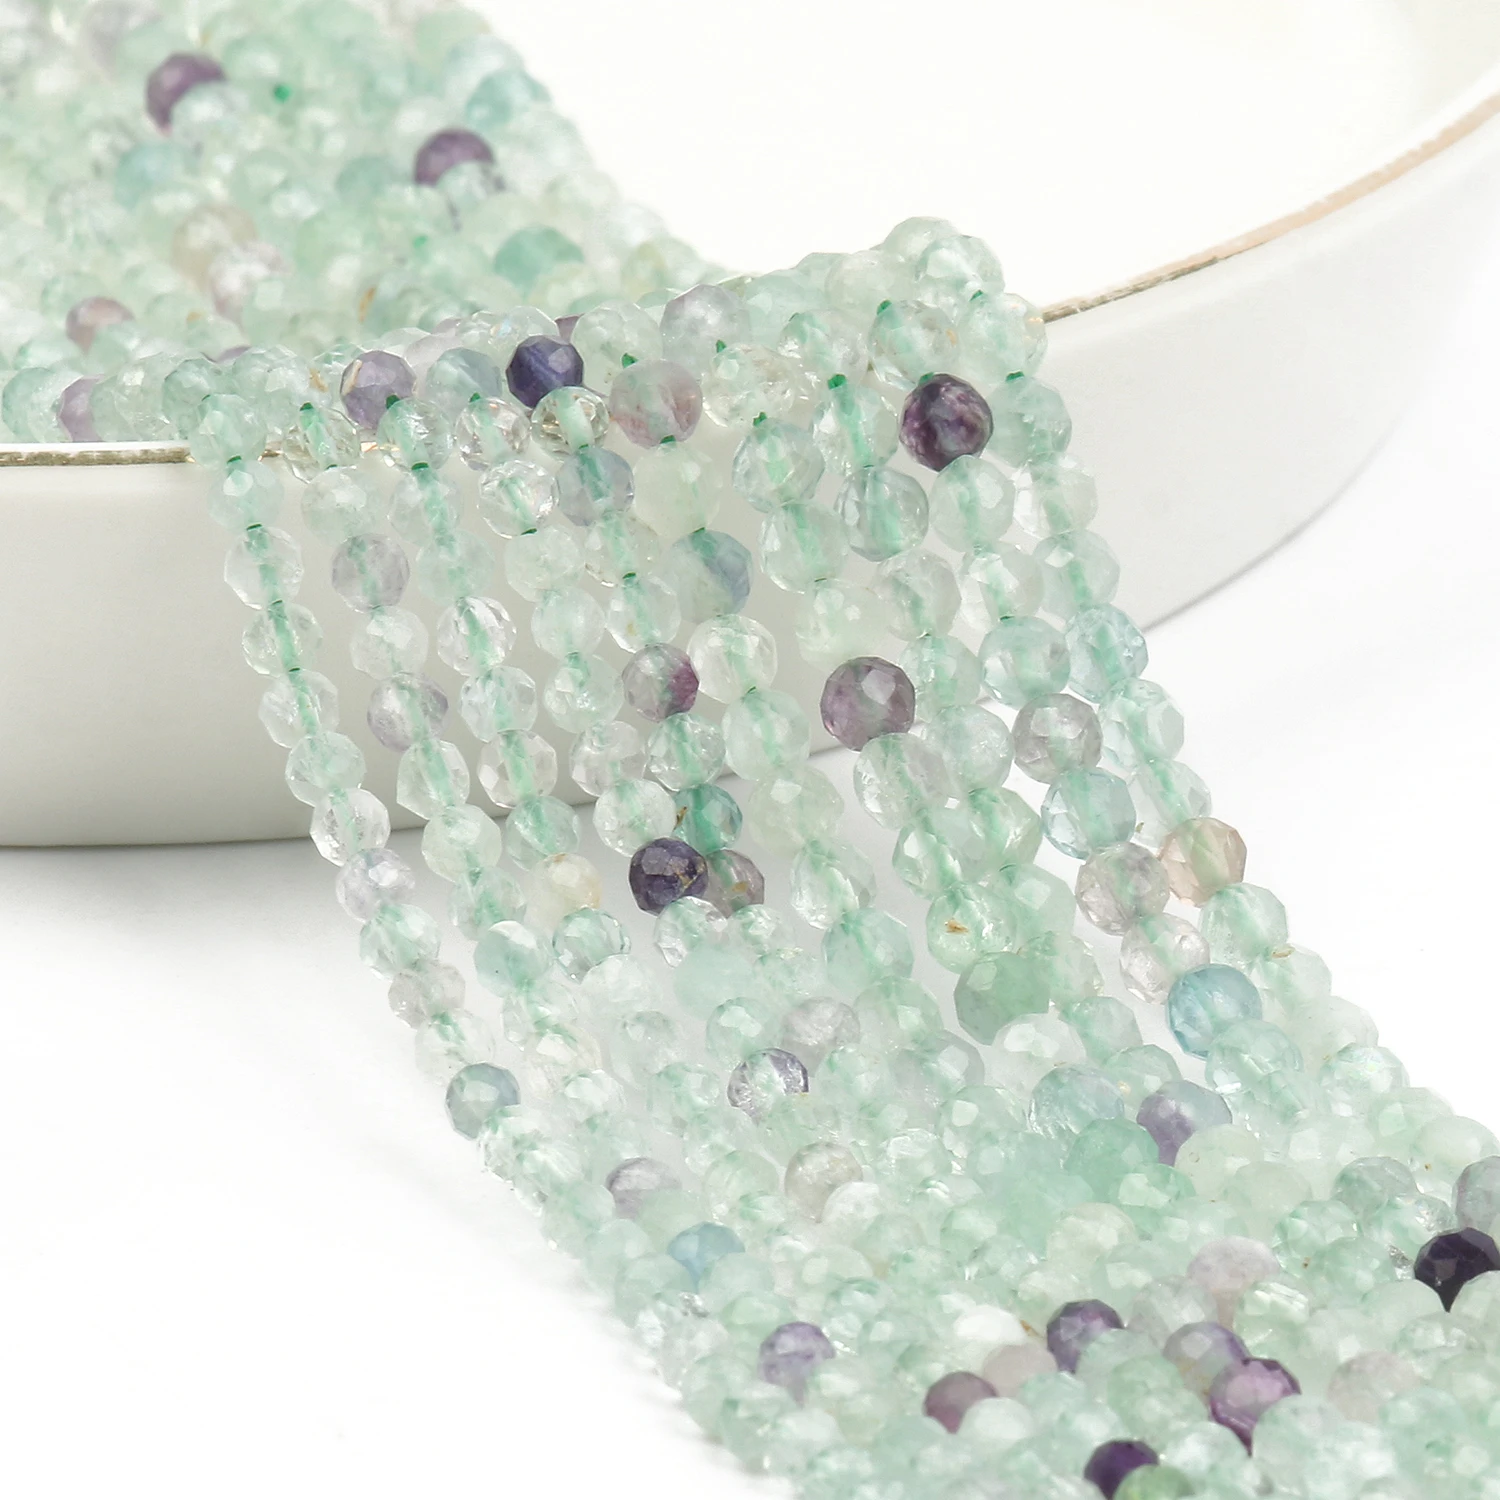 

Colorful Fluorite Faceted Waist Beads Natural Stone Loose Spacer Beads for DIY Handmade Jewelry Making Supplies Earring Bracelet